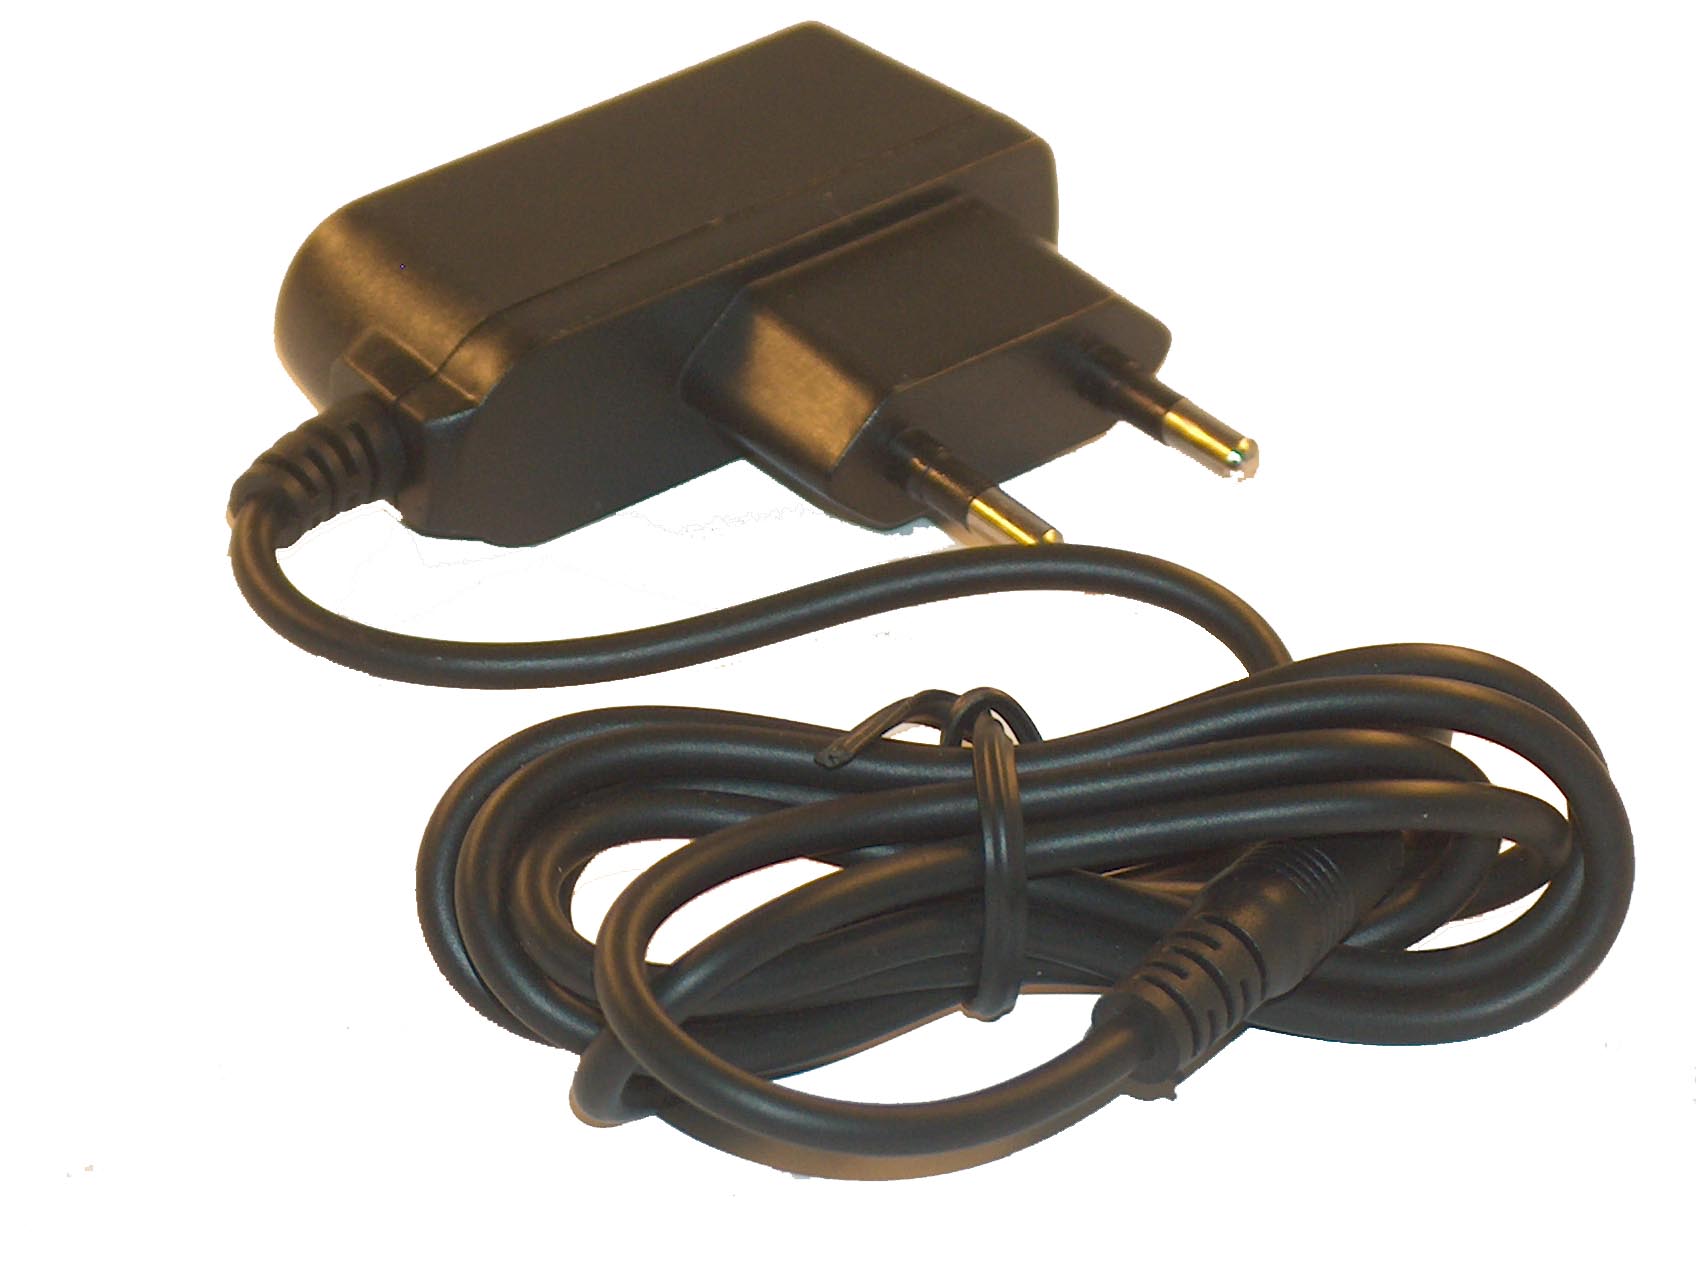 Charger for Elson EL500Mobile Phone